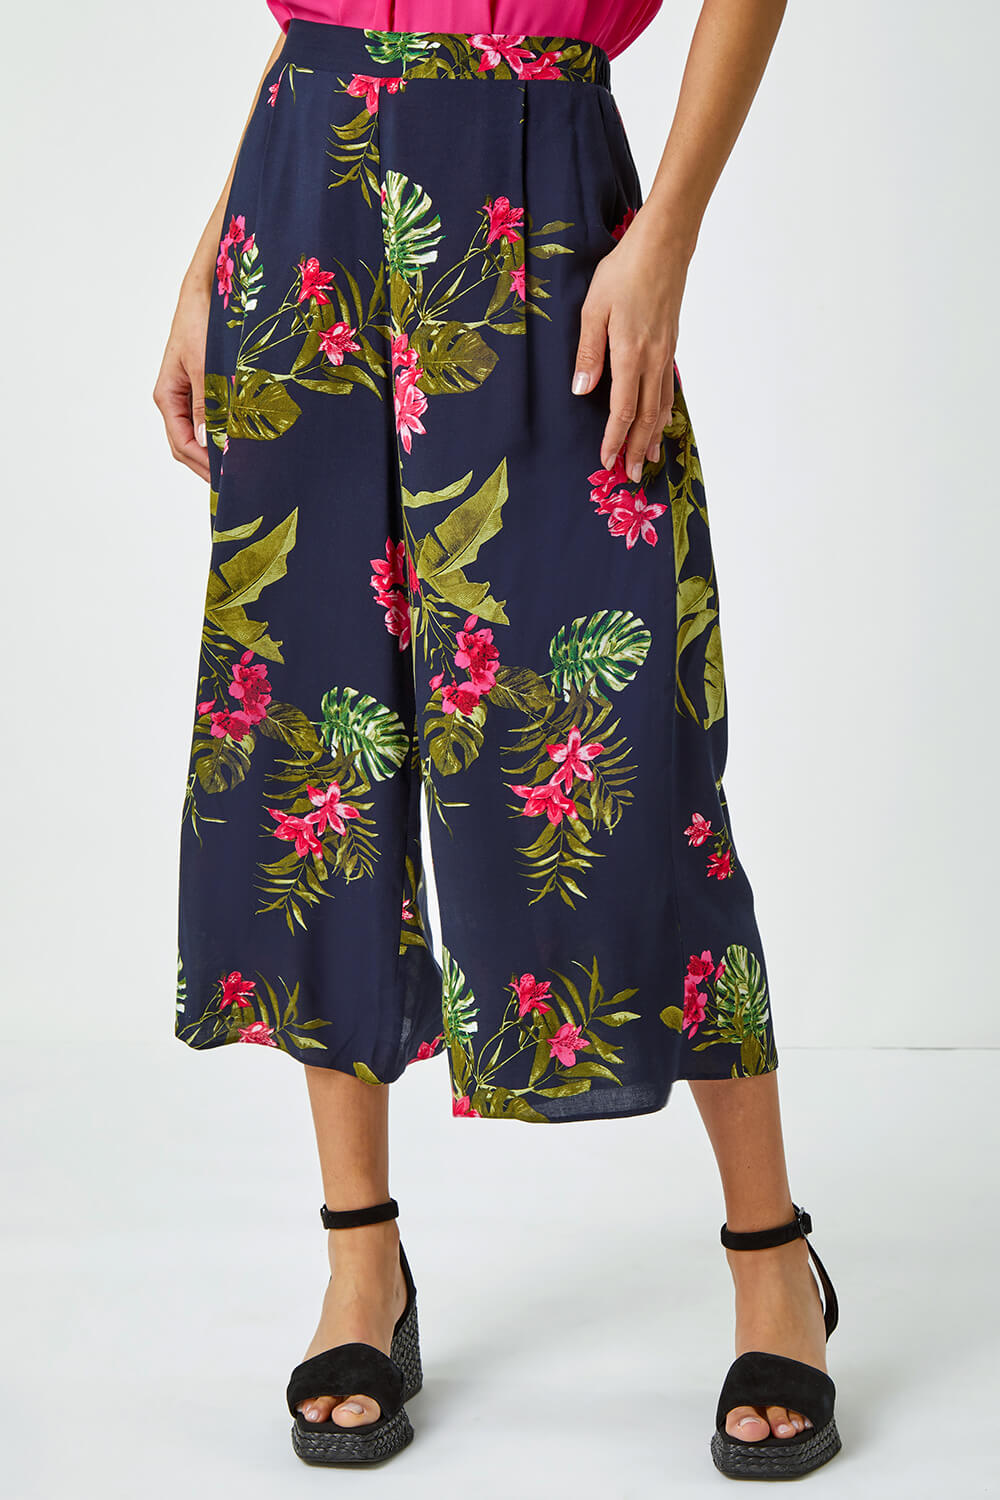 PINK Floral Palm Print Culottes, Image 5 of 5